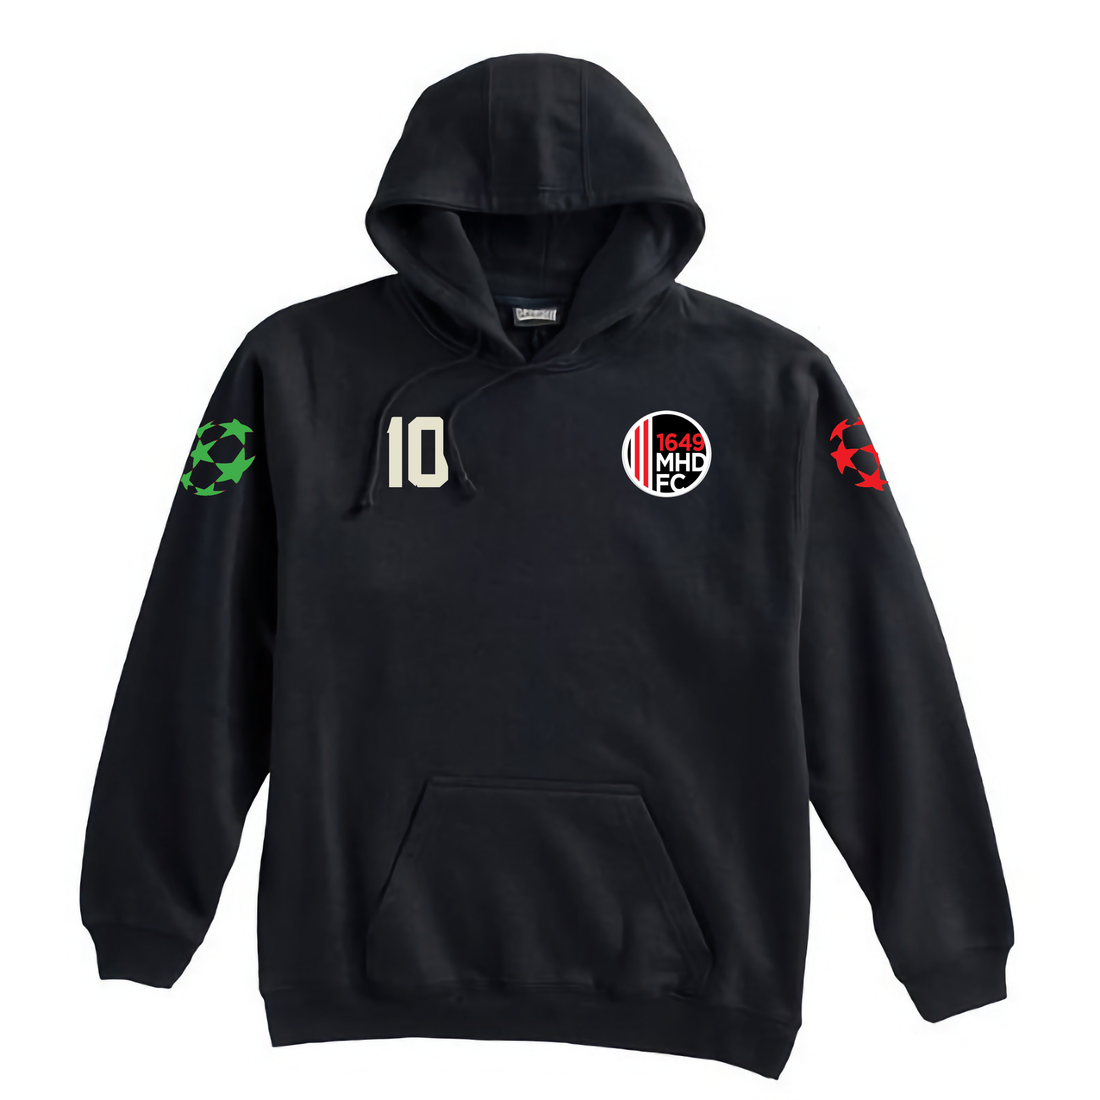 MHDFC Premium Embroidered Hoodie